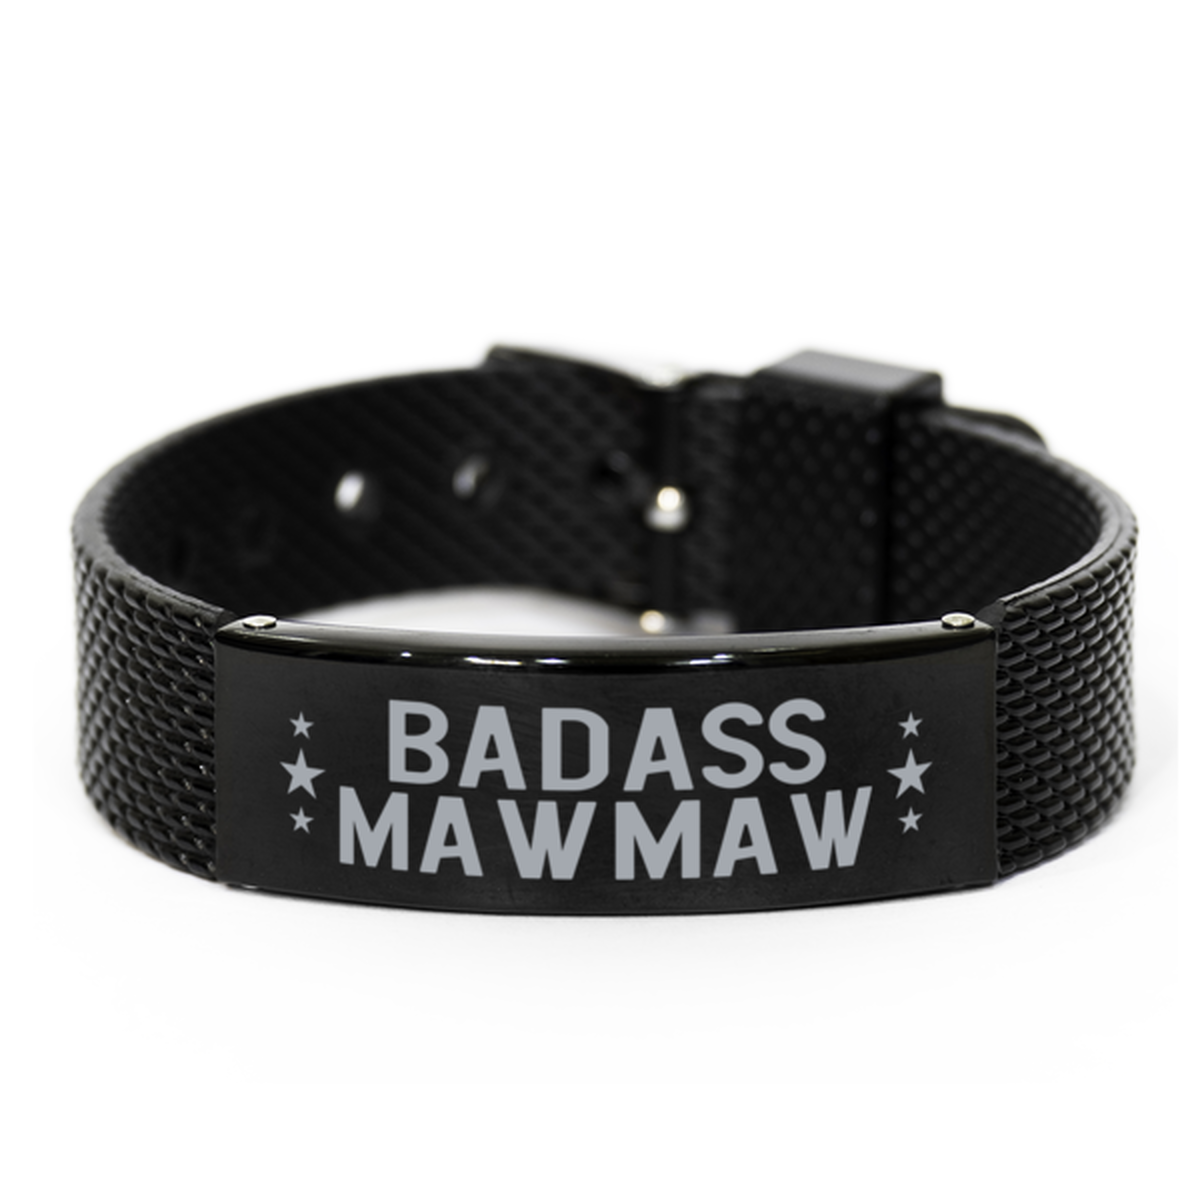 Mawmaw Black Shark Mesh Bracelet, Badass Mawmaw, Funny Family Gifts For Mawmaw From Granddaughter Grandson